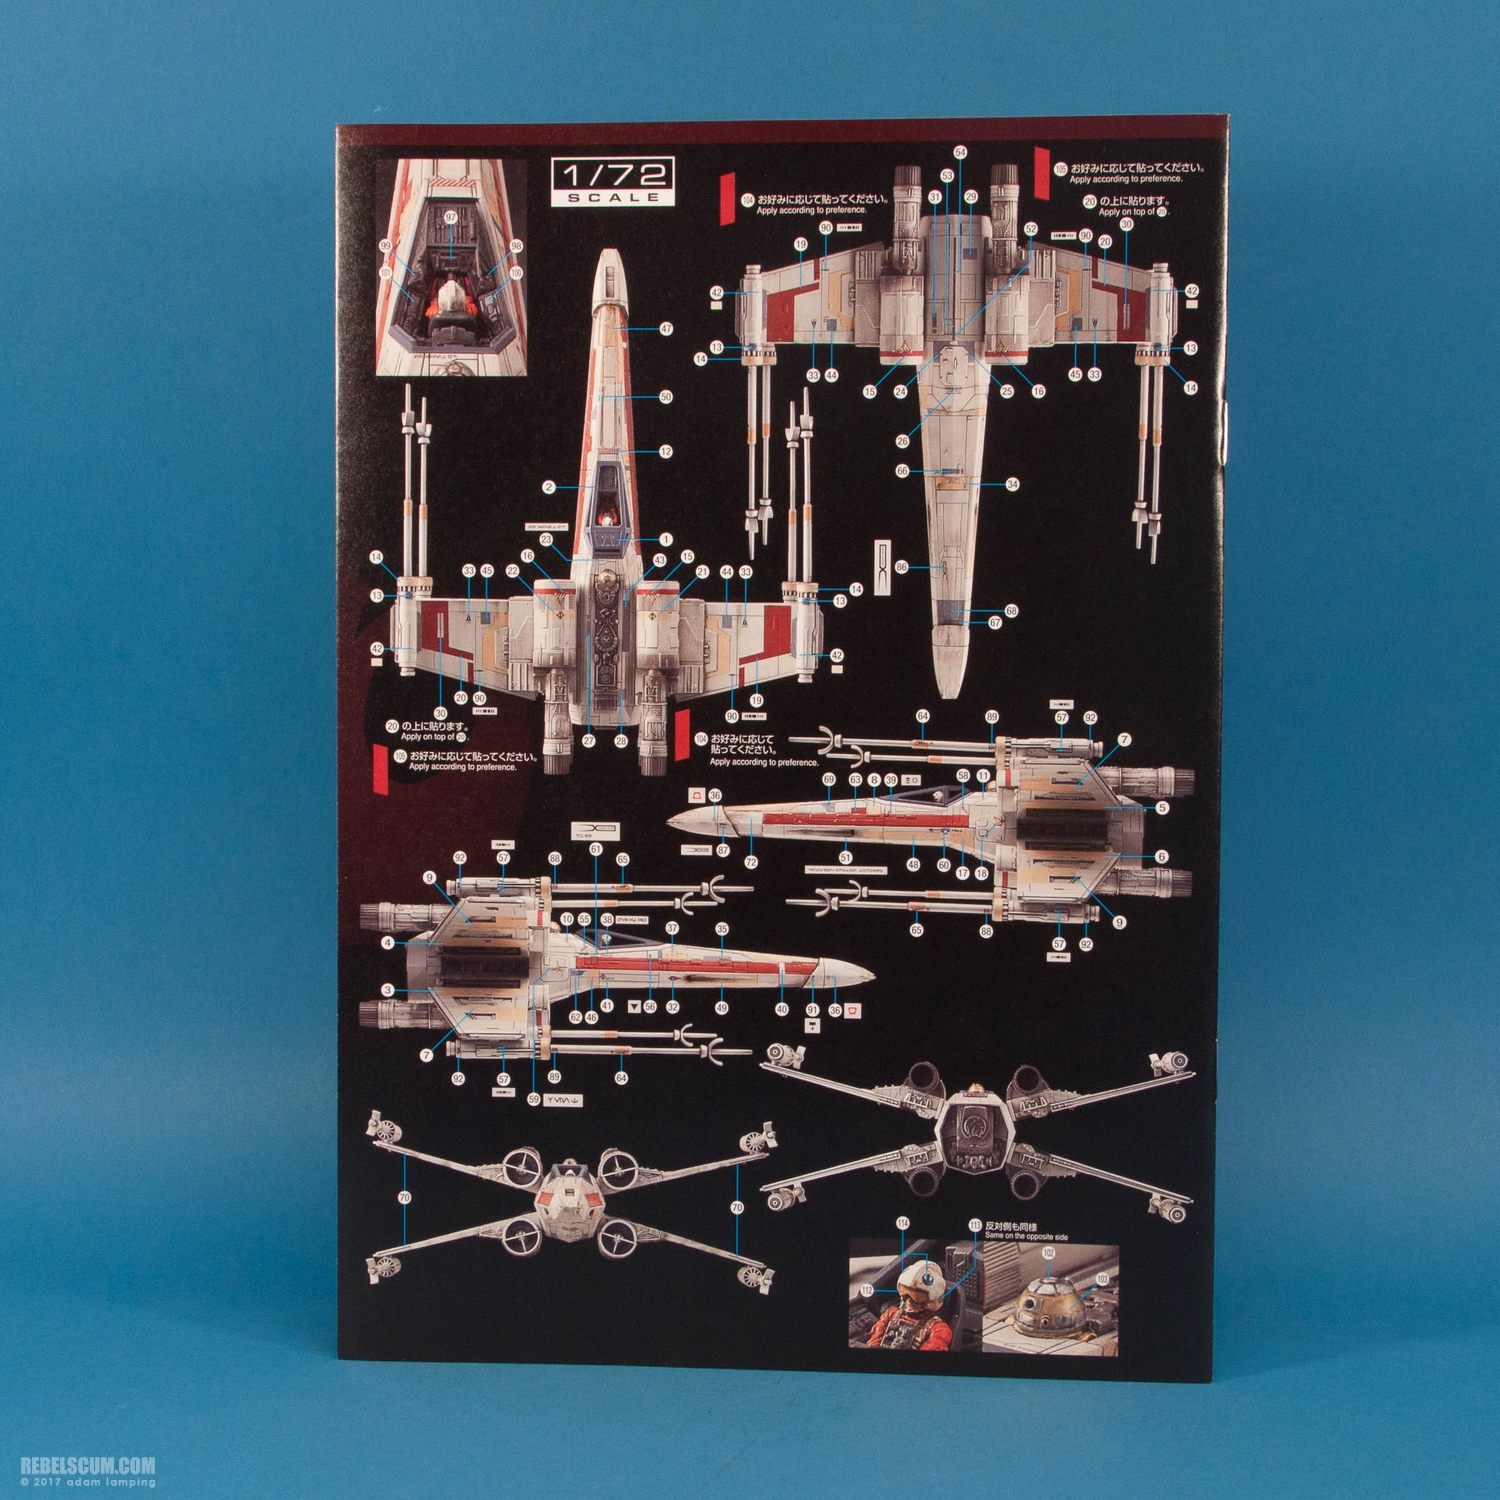 bandai-red-squadron-x-wing-starfighter-scale-model-kit-034.jpg